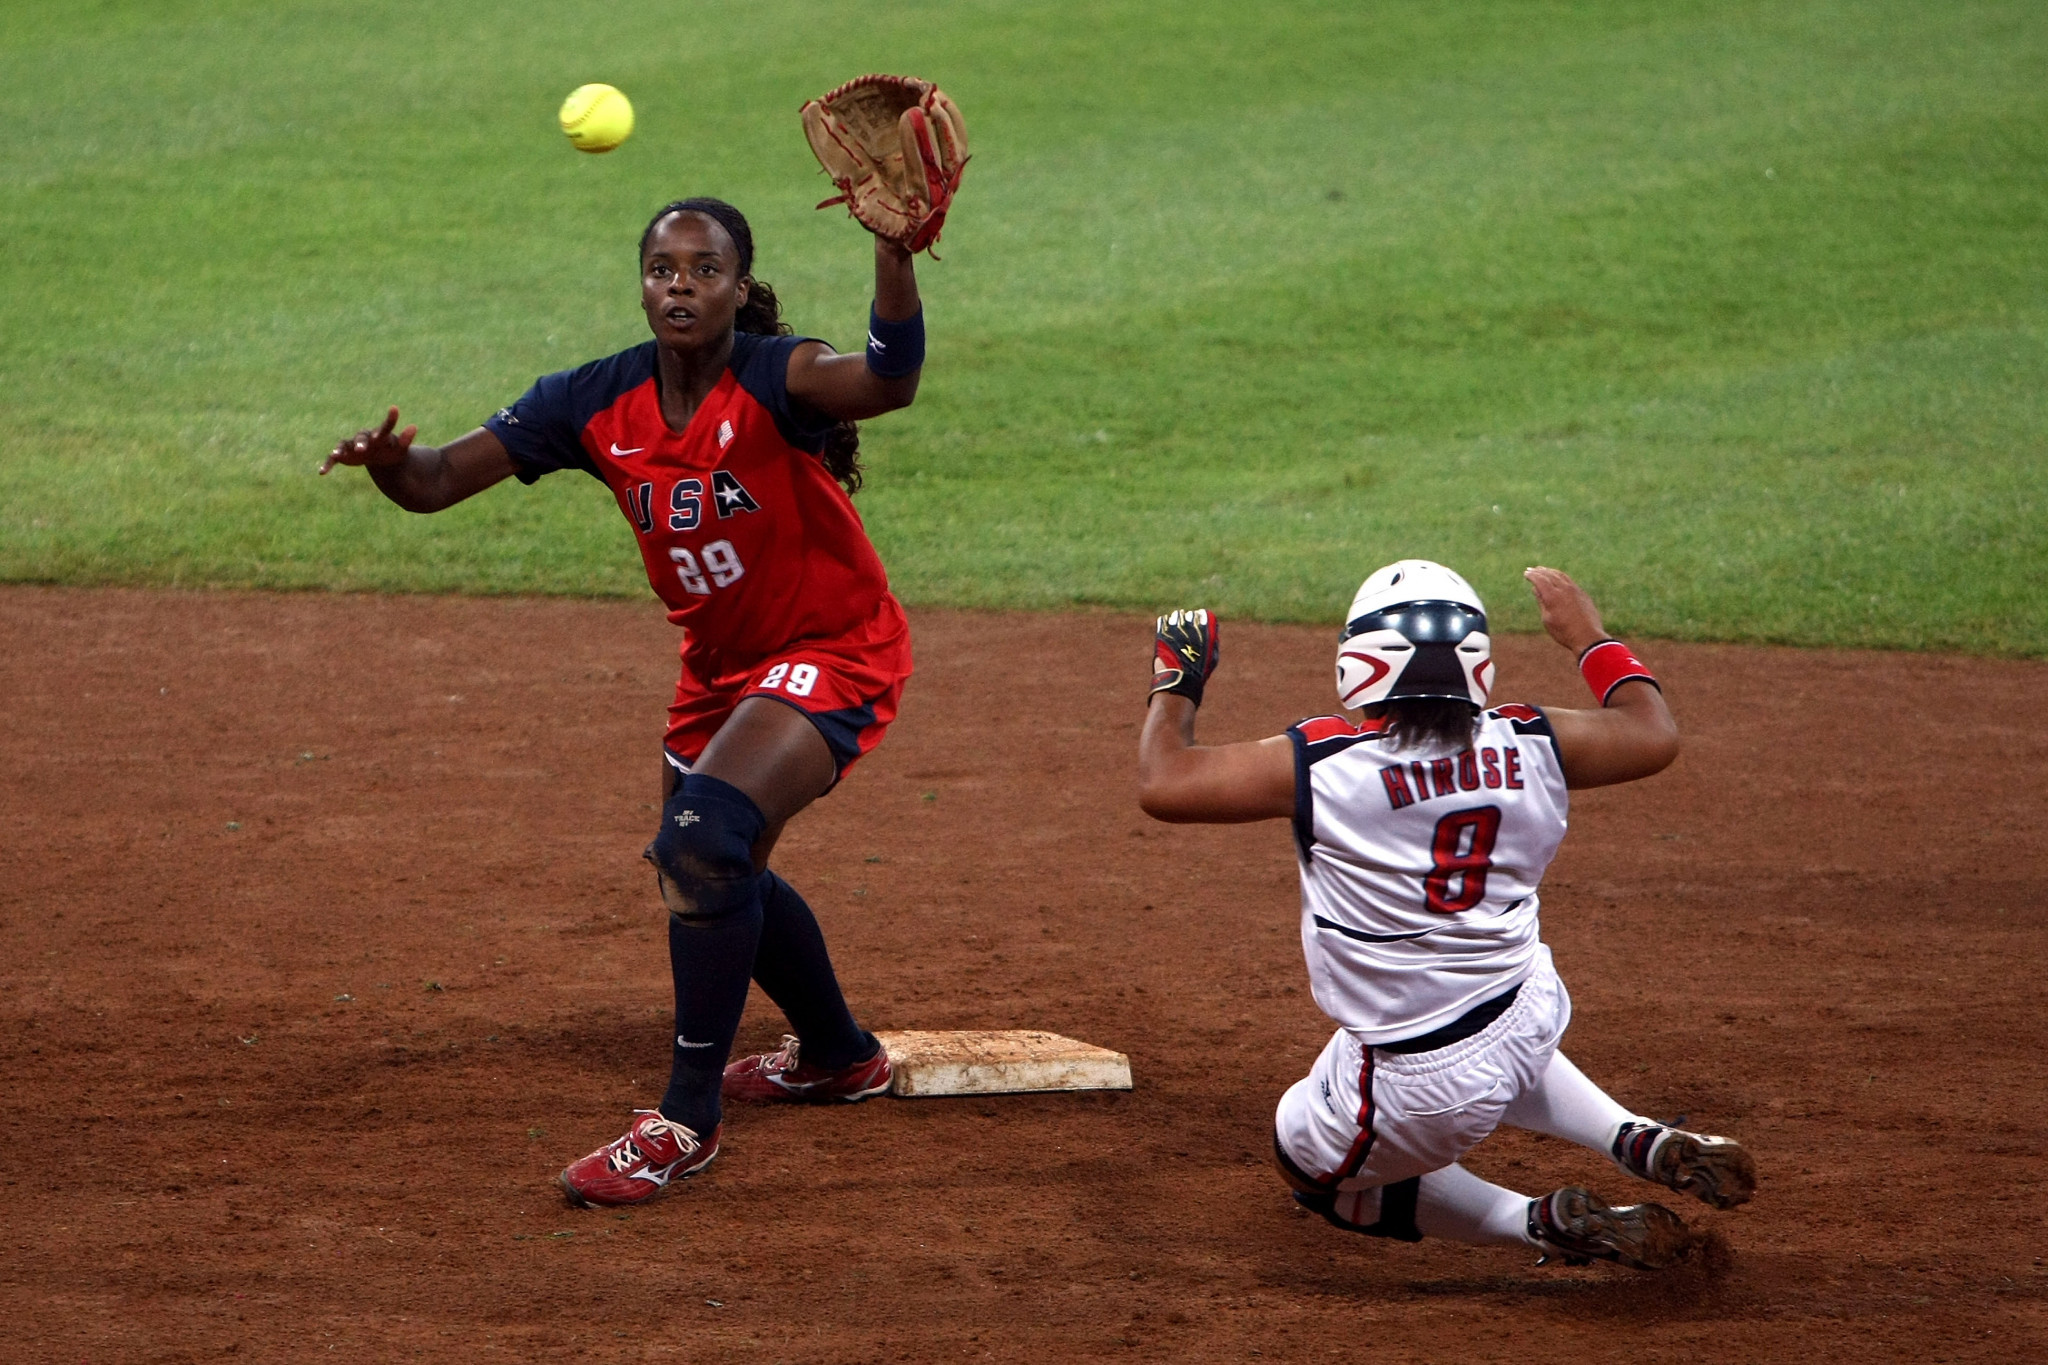 Softball is set to return to the Olympic programme next year ©Getty Images